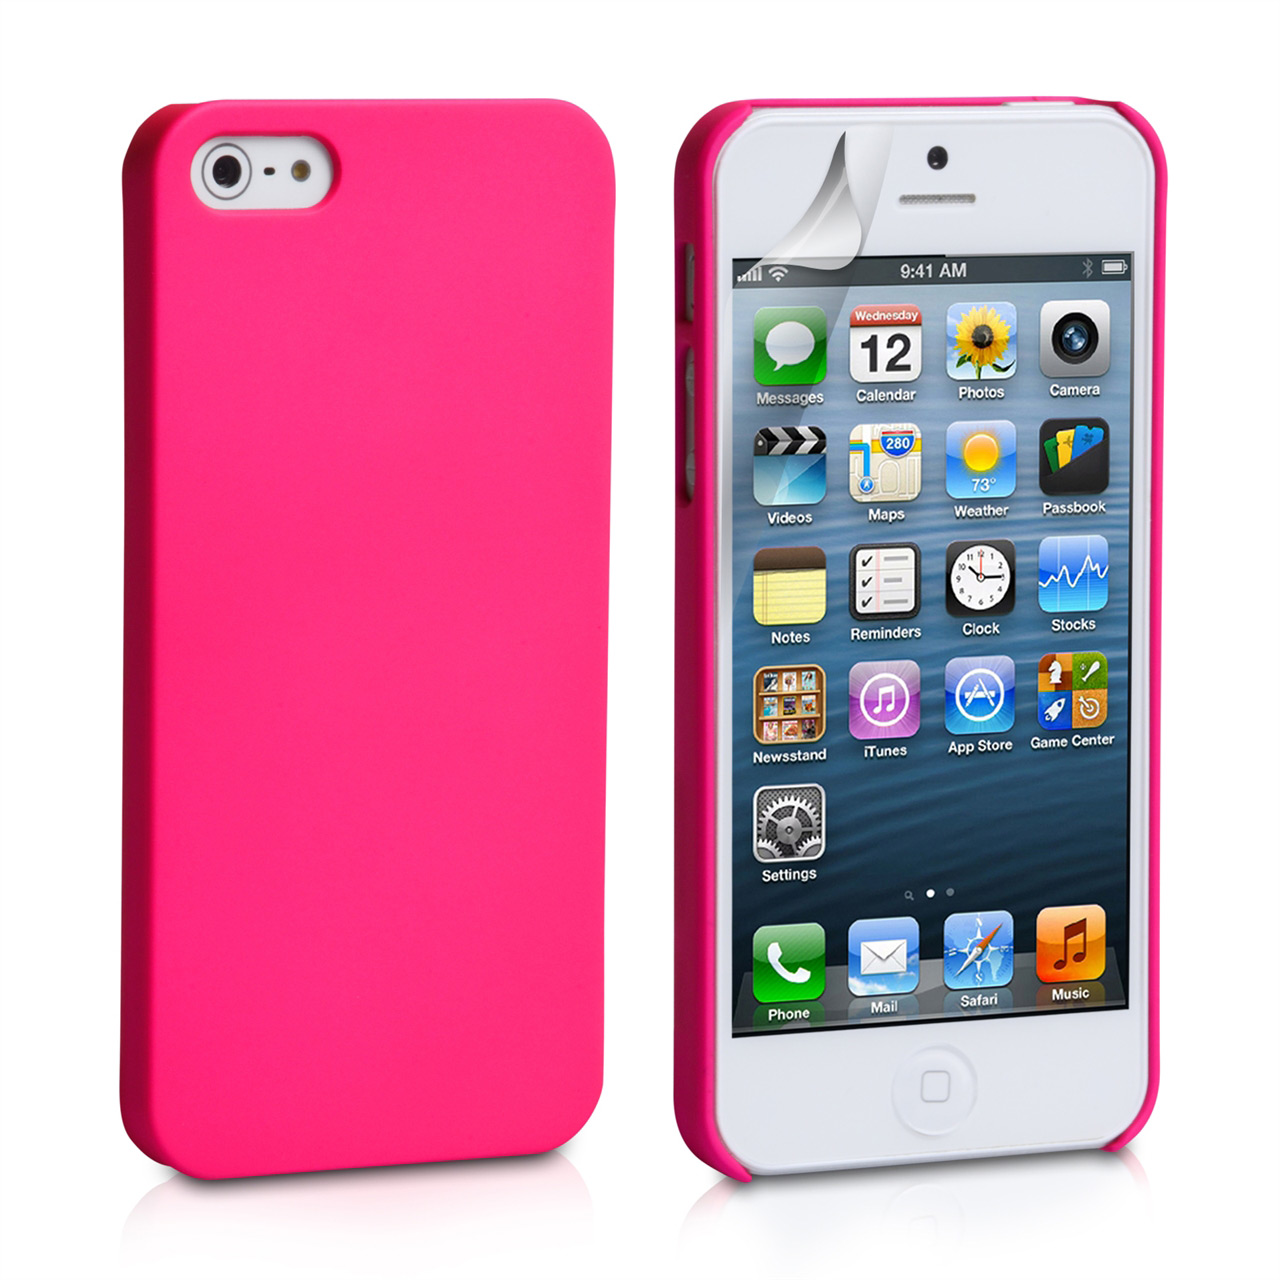 YouSave Accessories iPhone 5 / 5S Hard Hybrid Case - Hot Pink